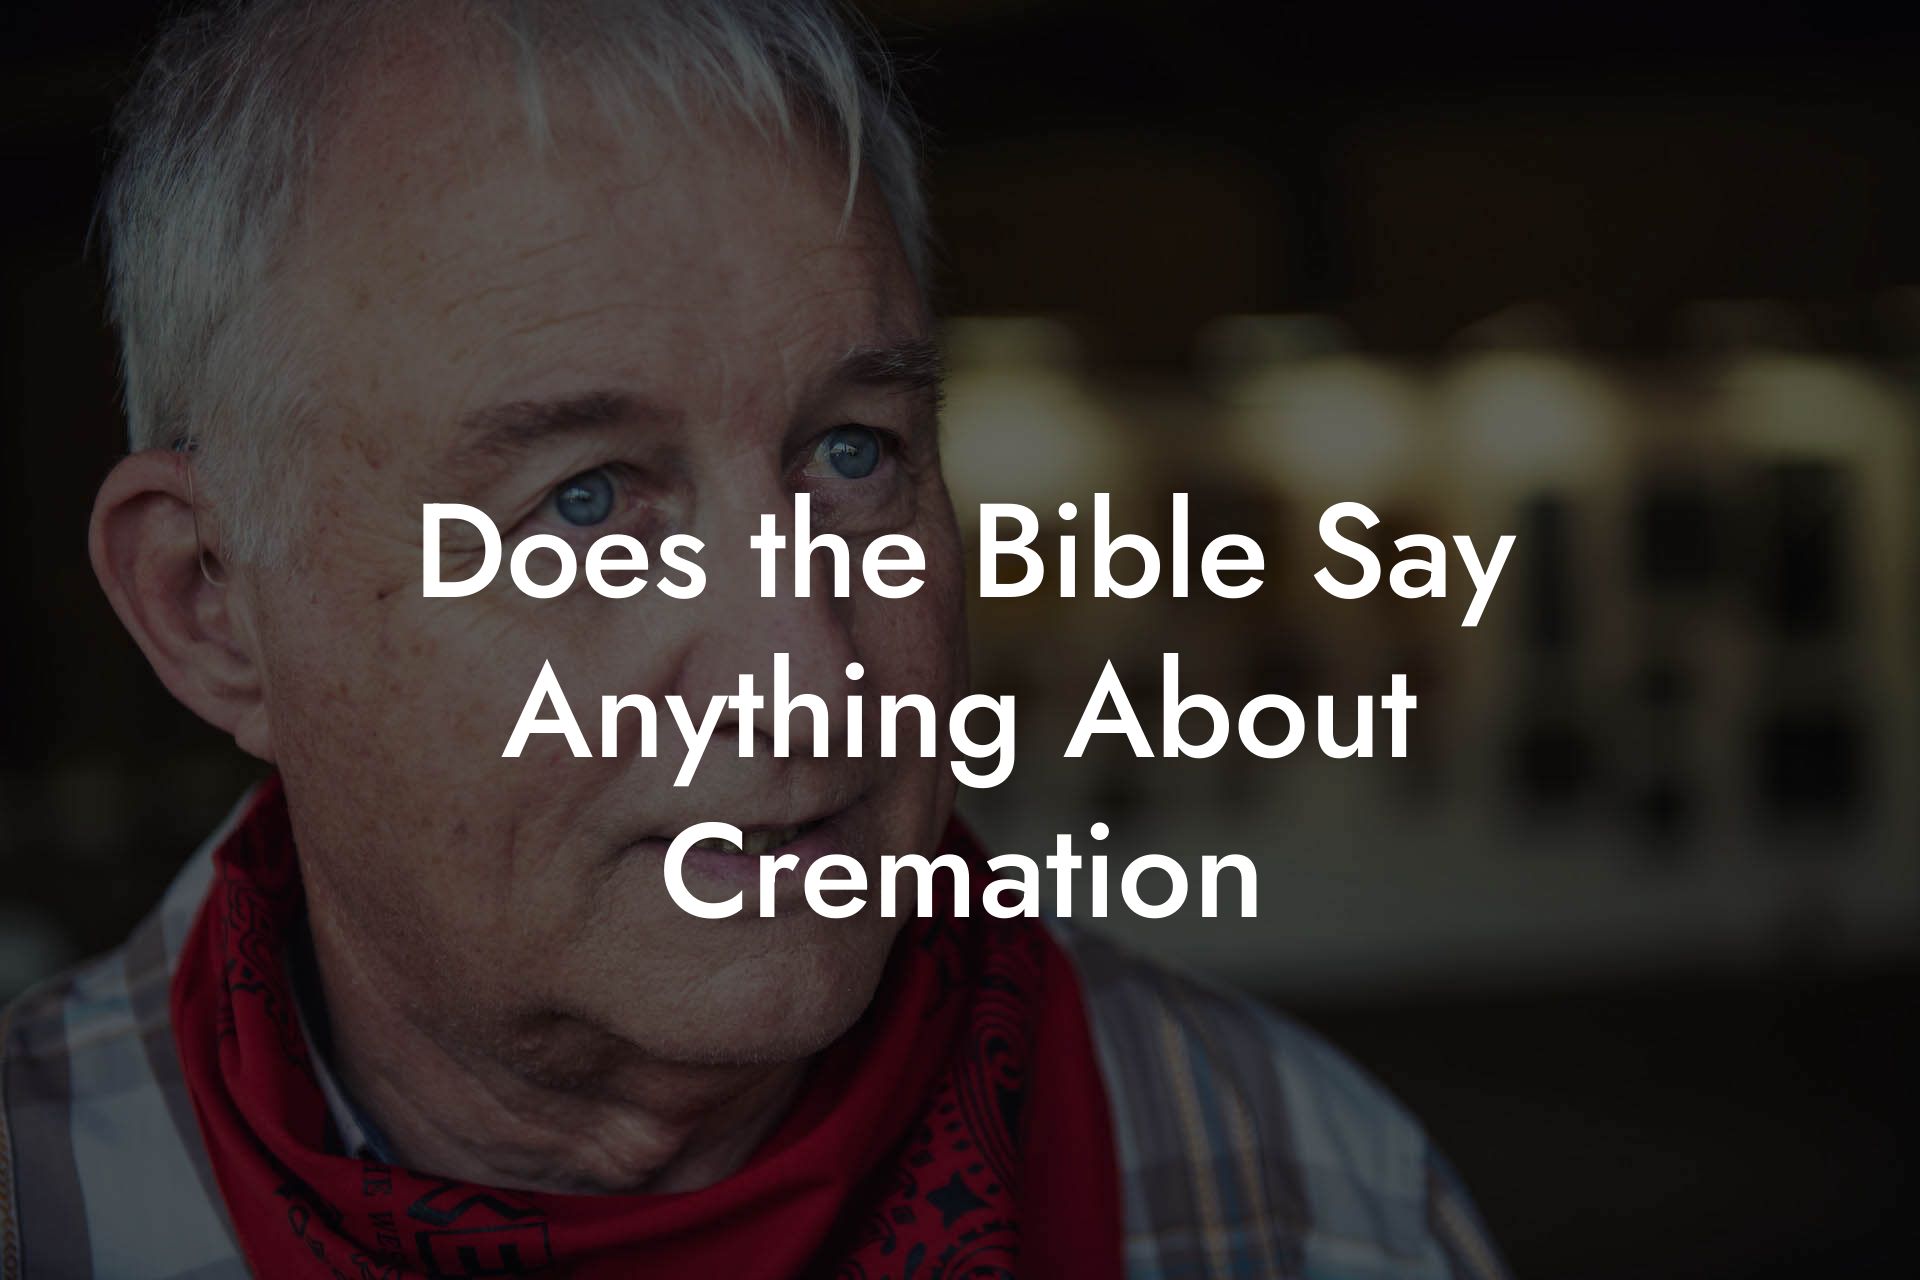 Does the Bible Say Anything About Cremation